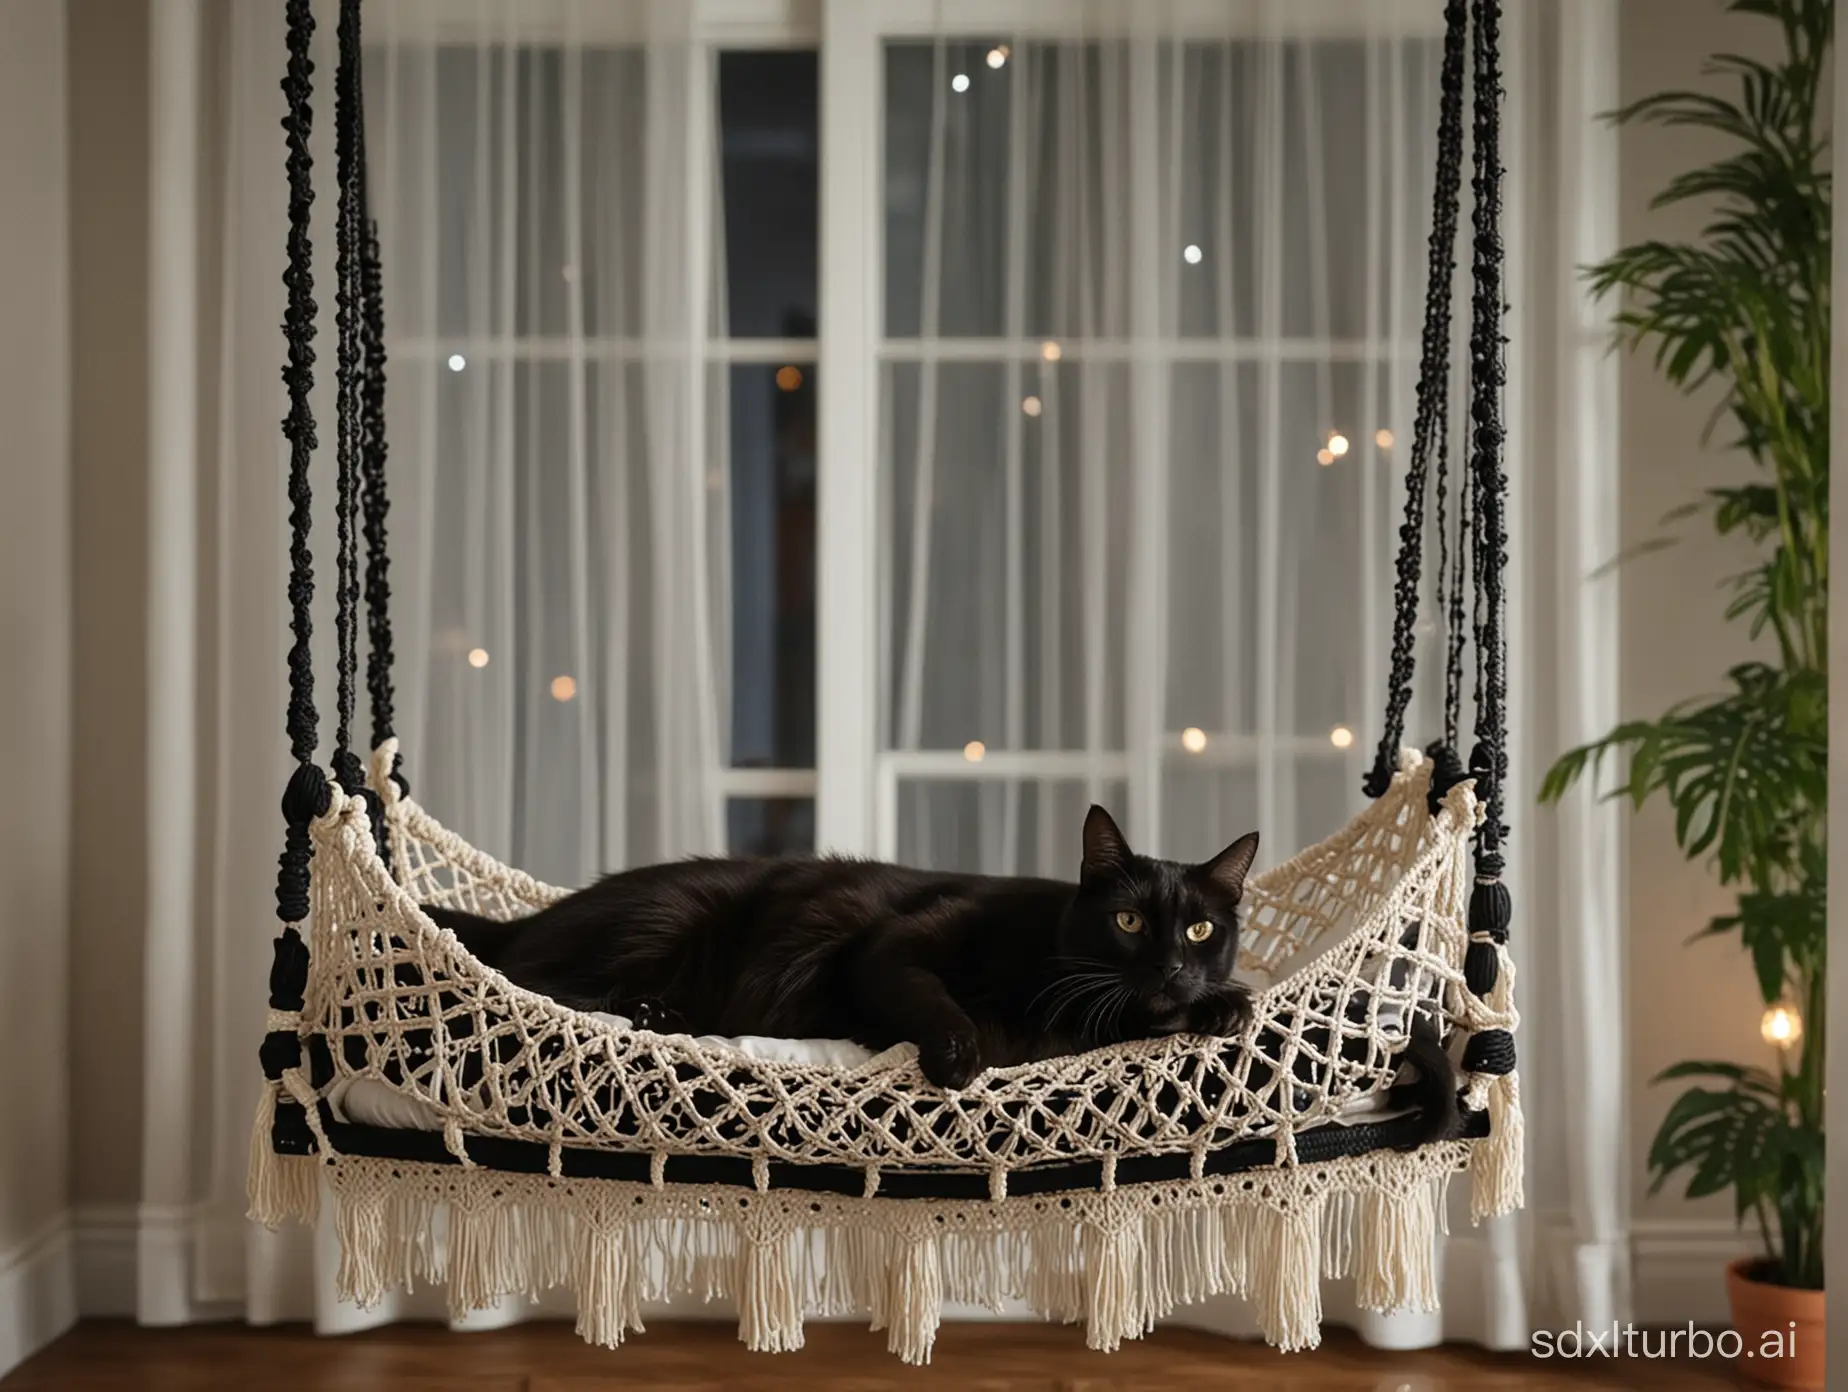 a black cat lying on a hanging bed made of macrame ,in front of window in bedroom,at night